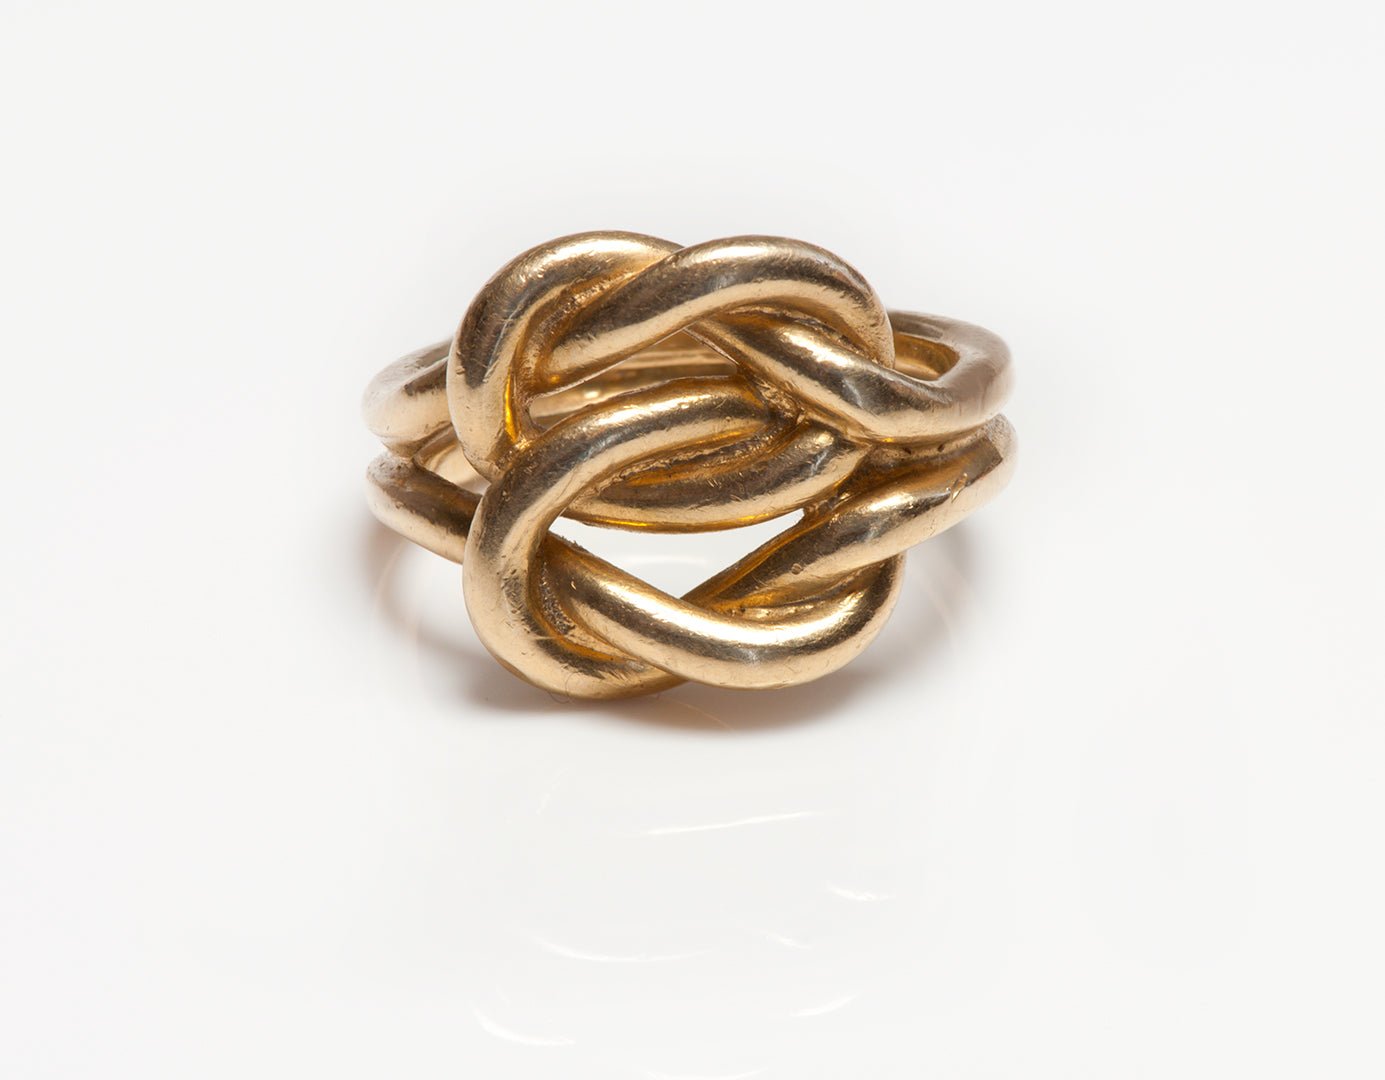 Vintage Tiffany & Co. Gold Lover's Knot Ring